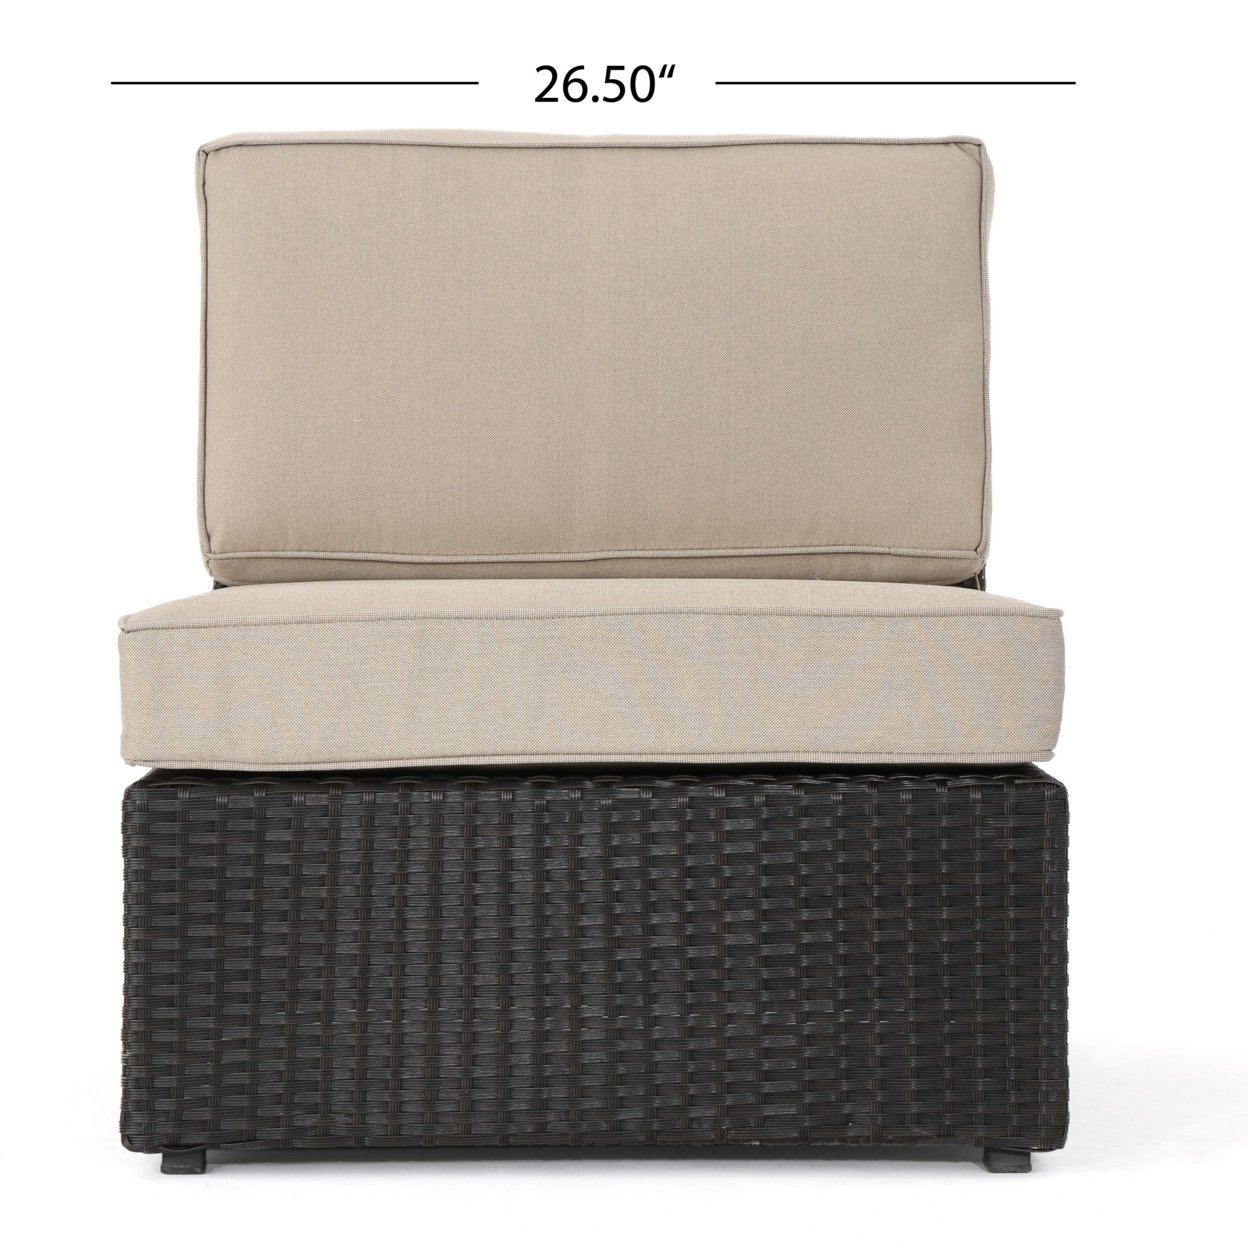 Reddington Outdoor Wicker Sectional Sofa Seat With Cushions (set Of 2) - Gray Wicker